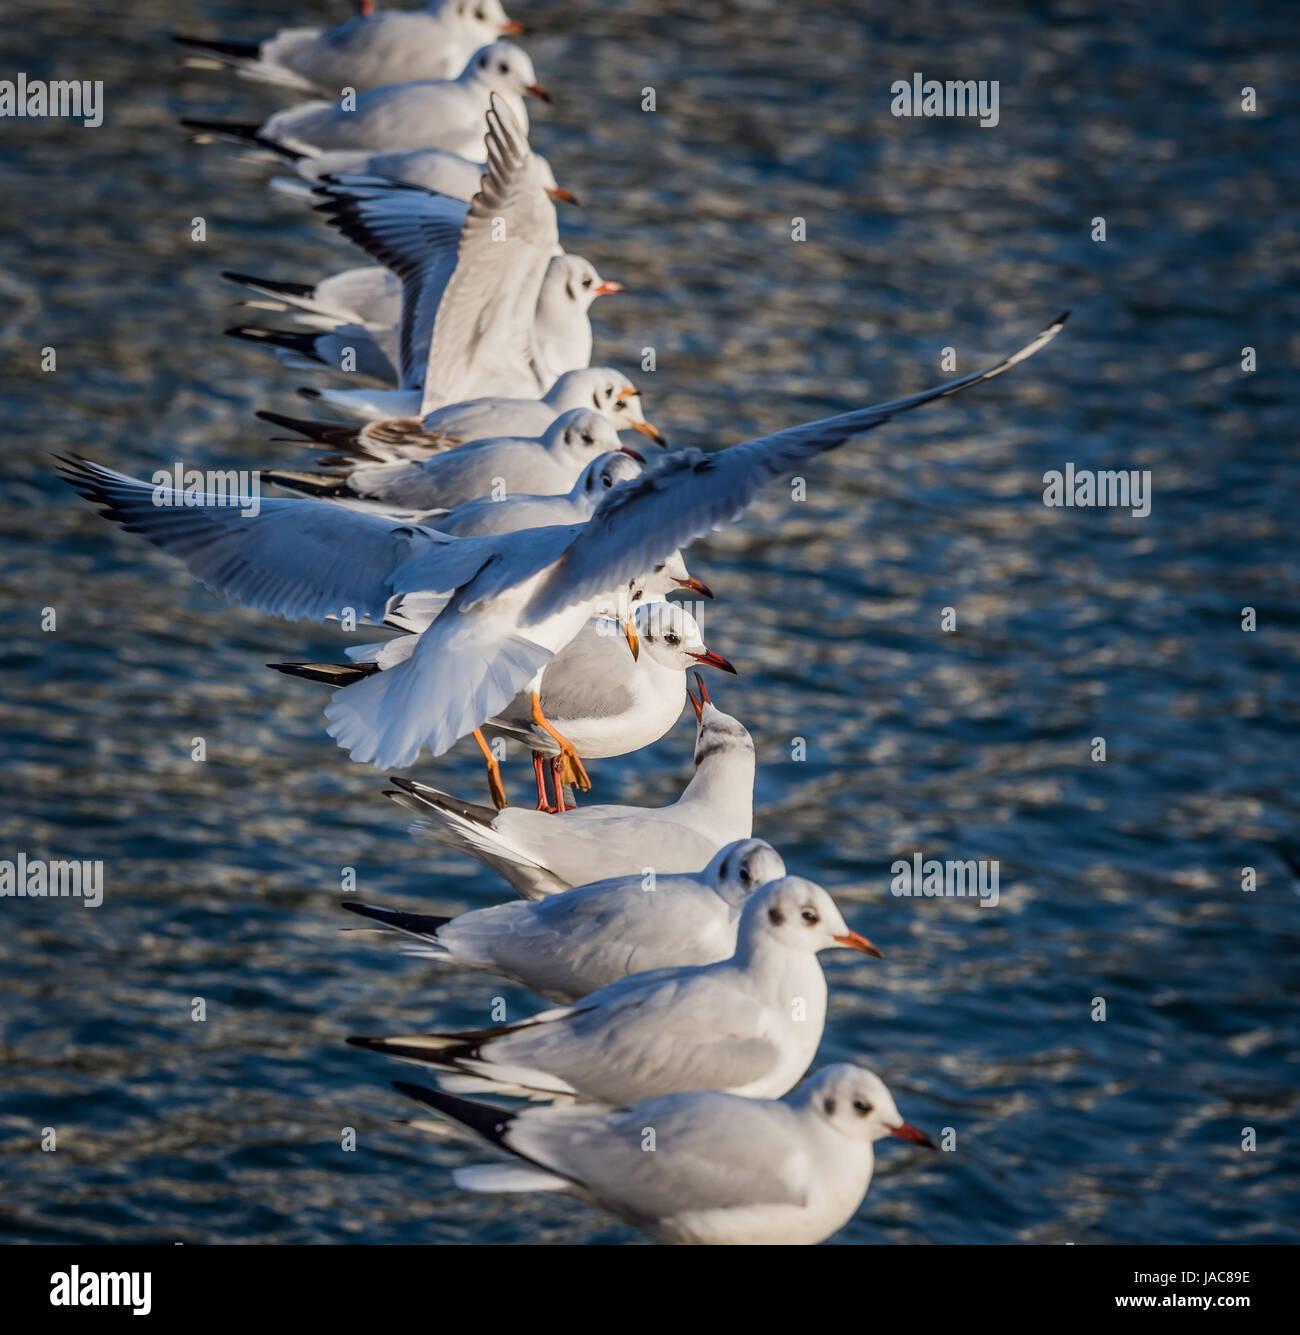 A gull flies to a rope with many other gulls. Symbolic photo for place need, narrowness and claustrophobia, Eine Möwe fliegt zu einem Seil mit vielen  Stock Photo